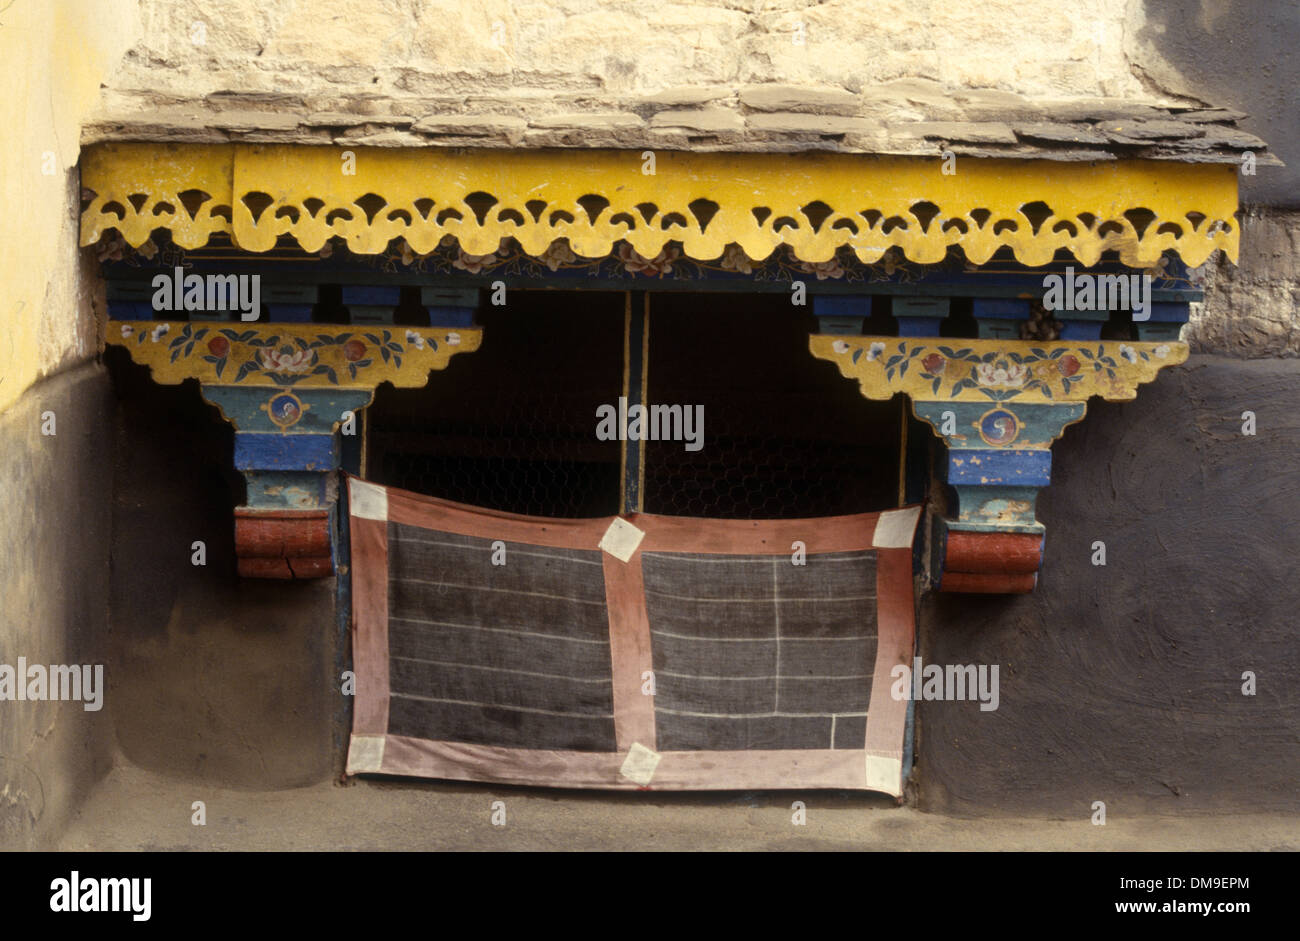 A traditionally decorated window find in a monastery of Lhasa, Tibet, China Stock Photo